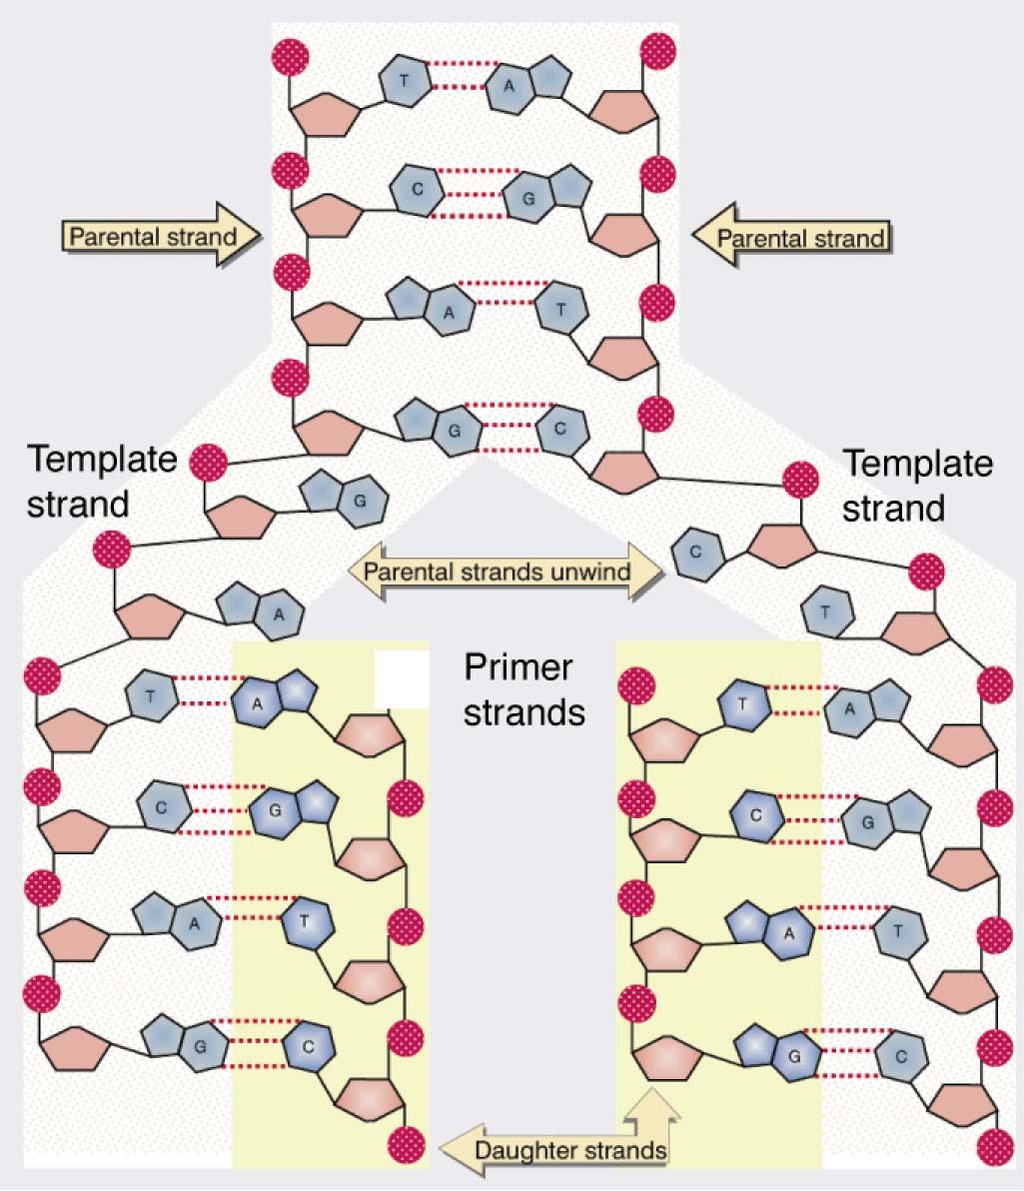 DNA is a double helix Critical (if somewhat obvious) thing to remember for both replication and repair: Symmetry (base